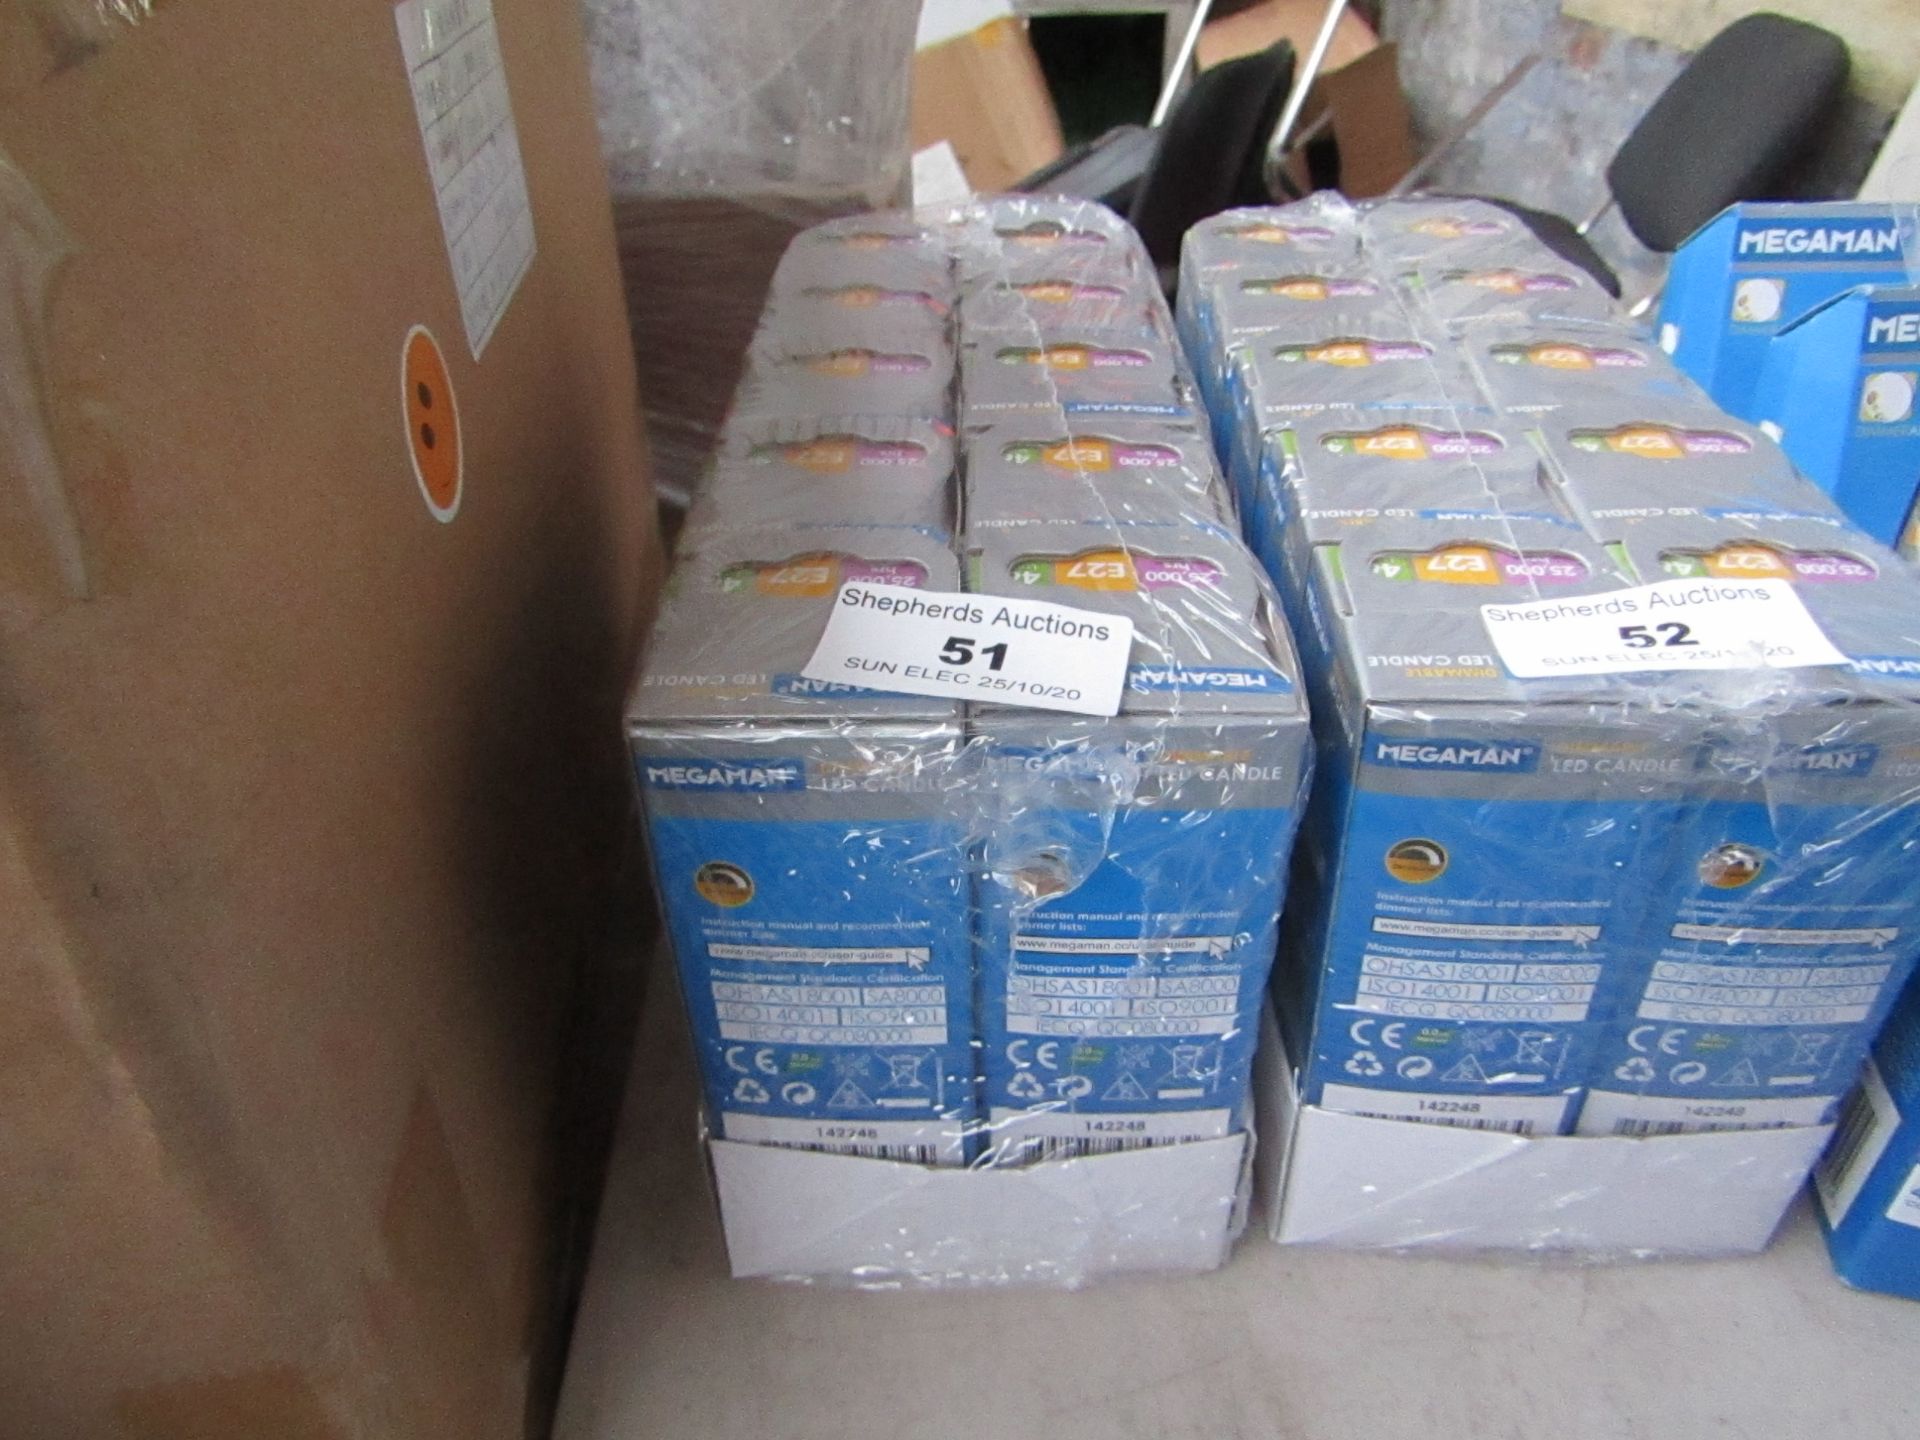 10x Megaman LED dimable candle lamp, new and boxed. 25,000Hrs / E27 / 250 Lumens